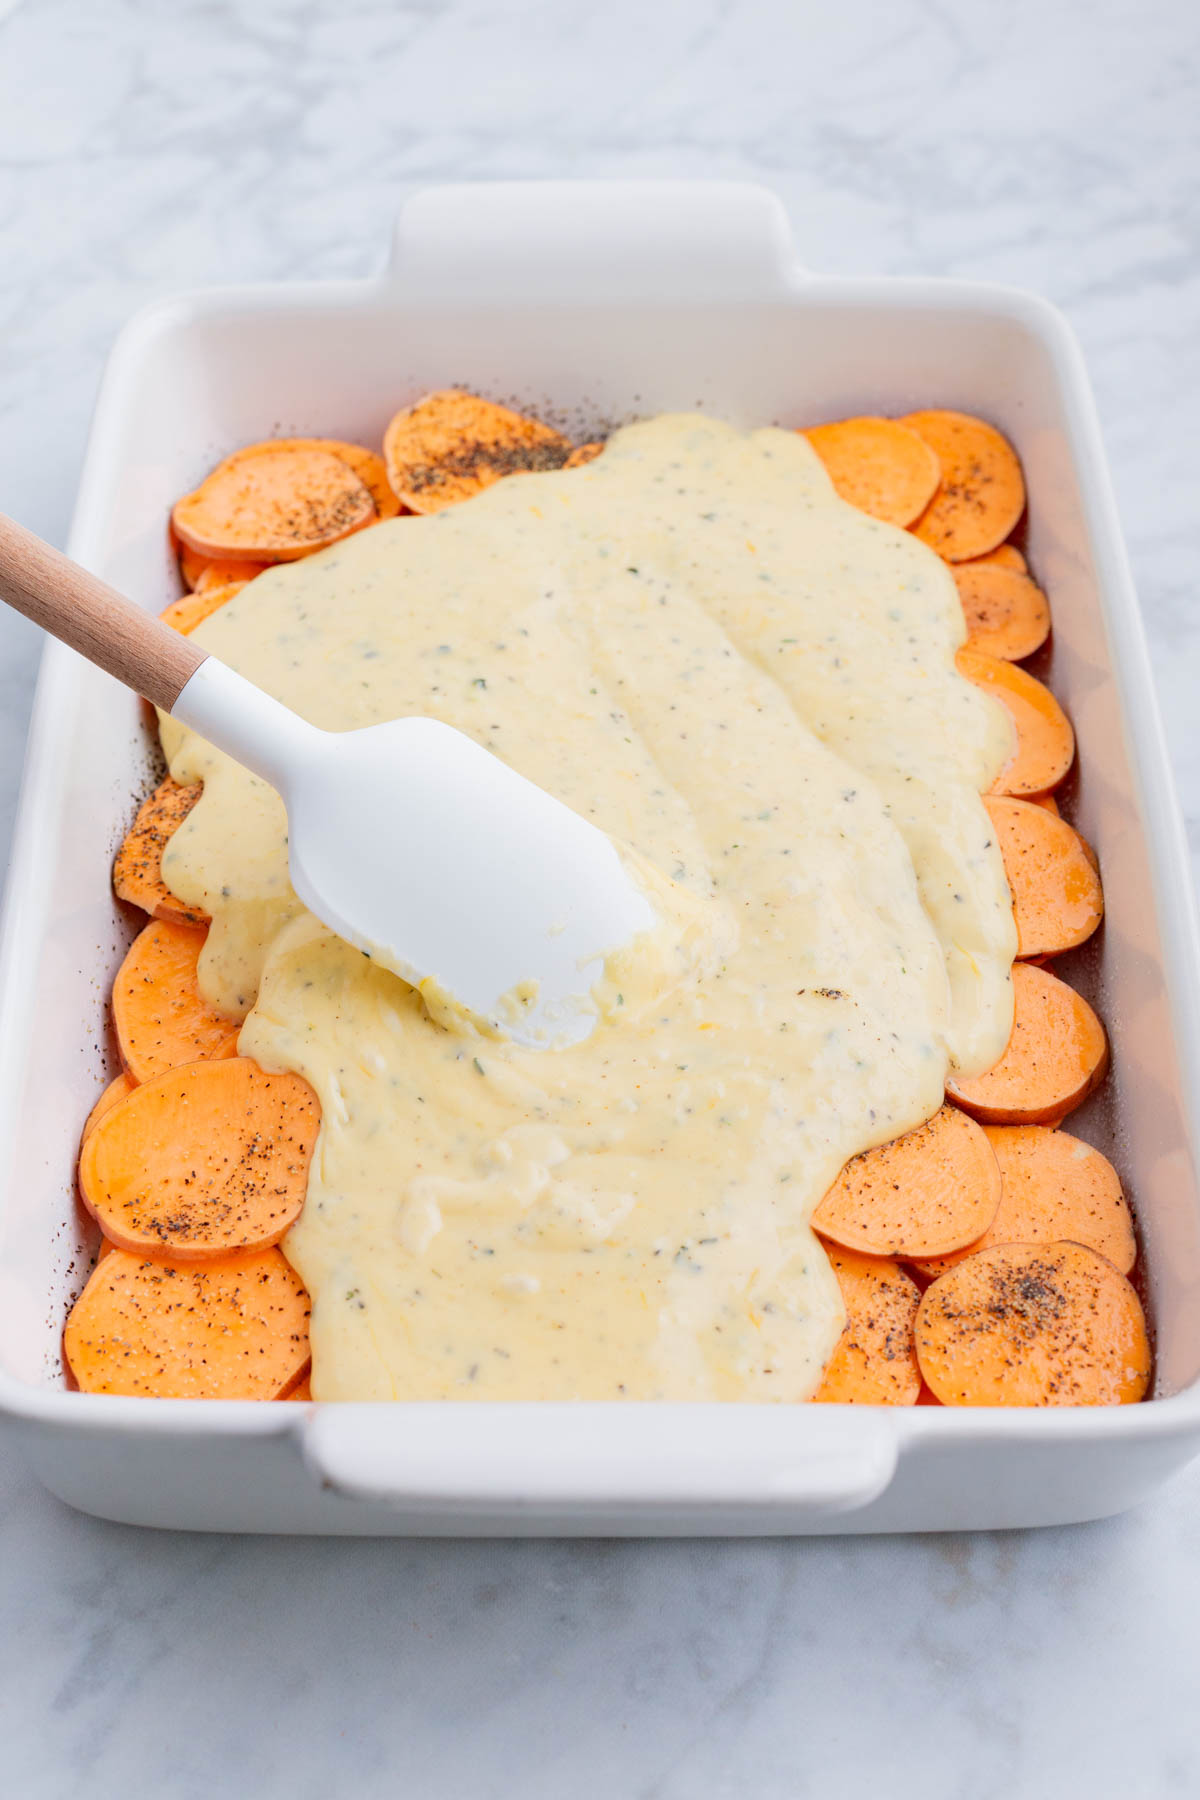 The cheese sauce is spread across the sliced sweet potatoes.